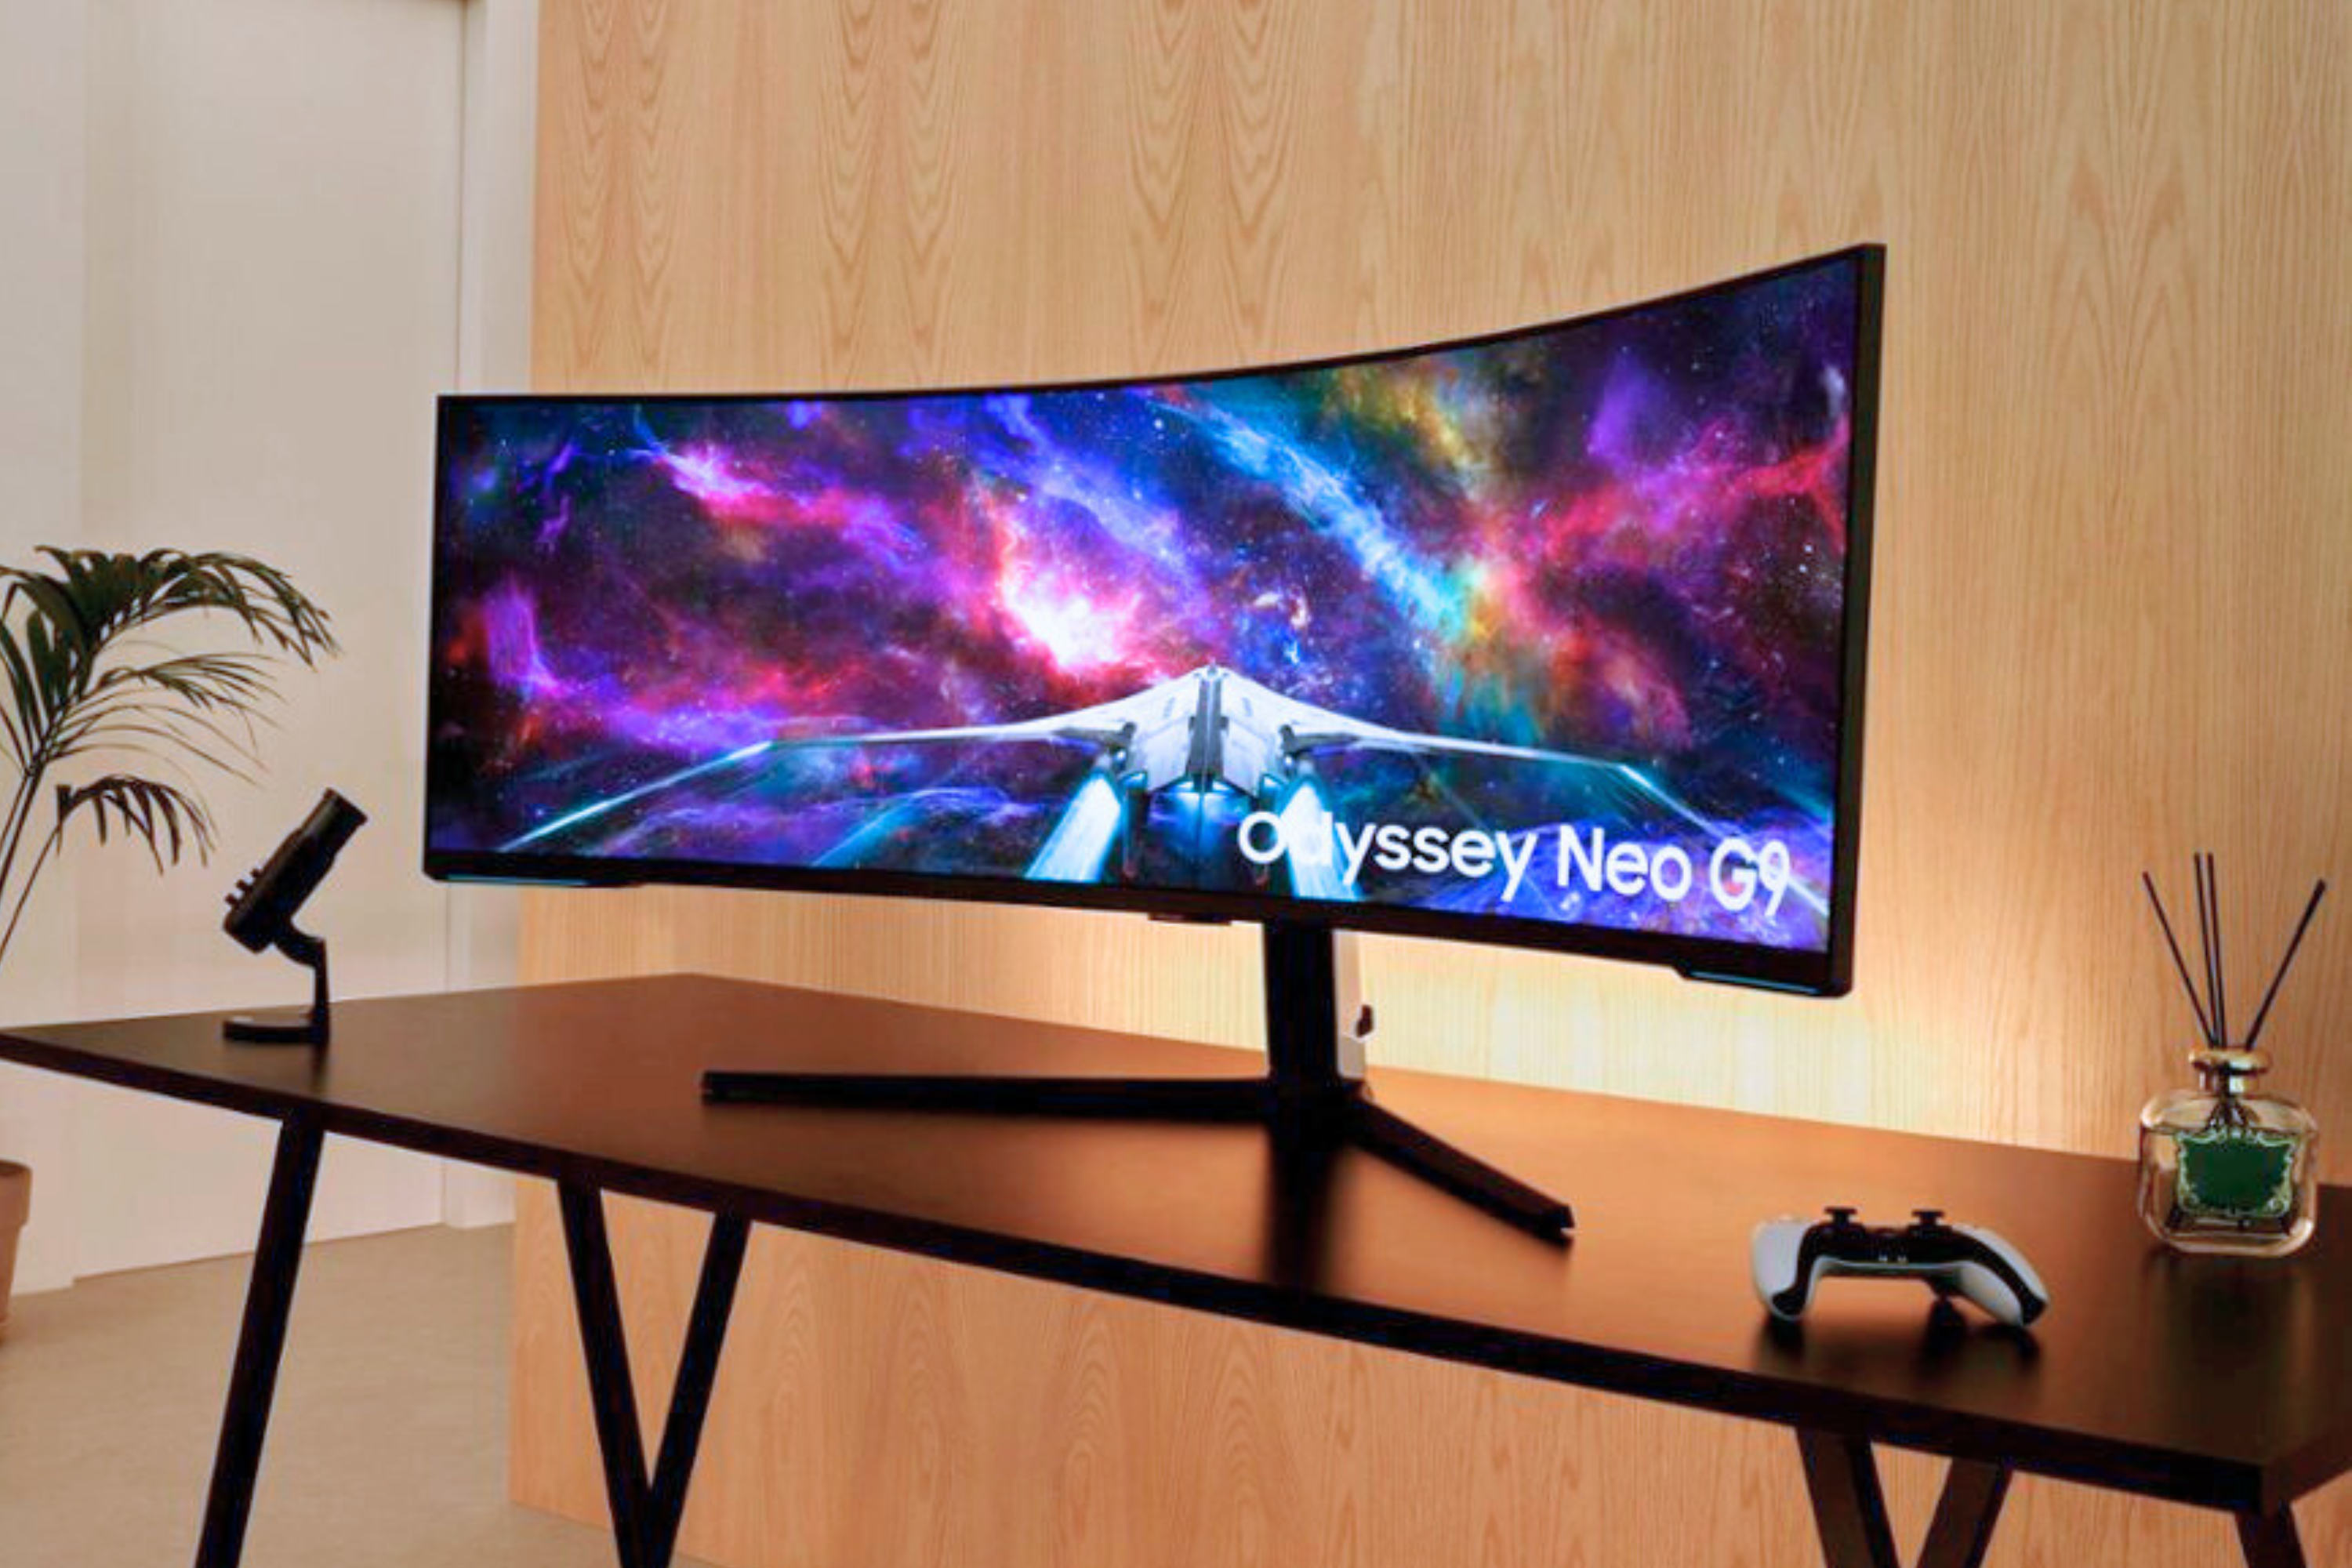 SAMSUNG 57-inch Odyssey Neo G9 Series Dual 4K UHD 1000R Curved Gaming Monitor on desk in front of light